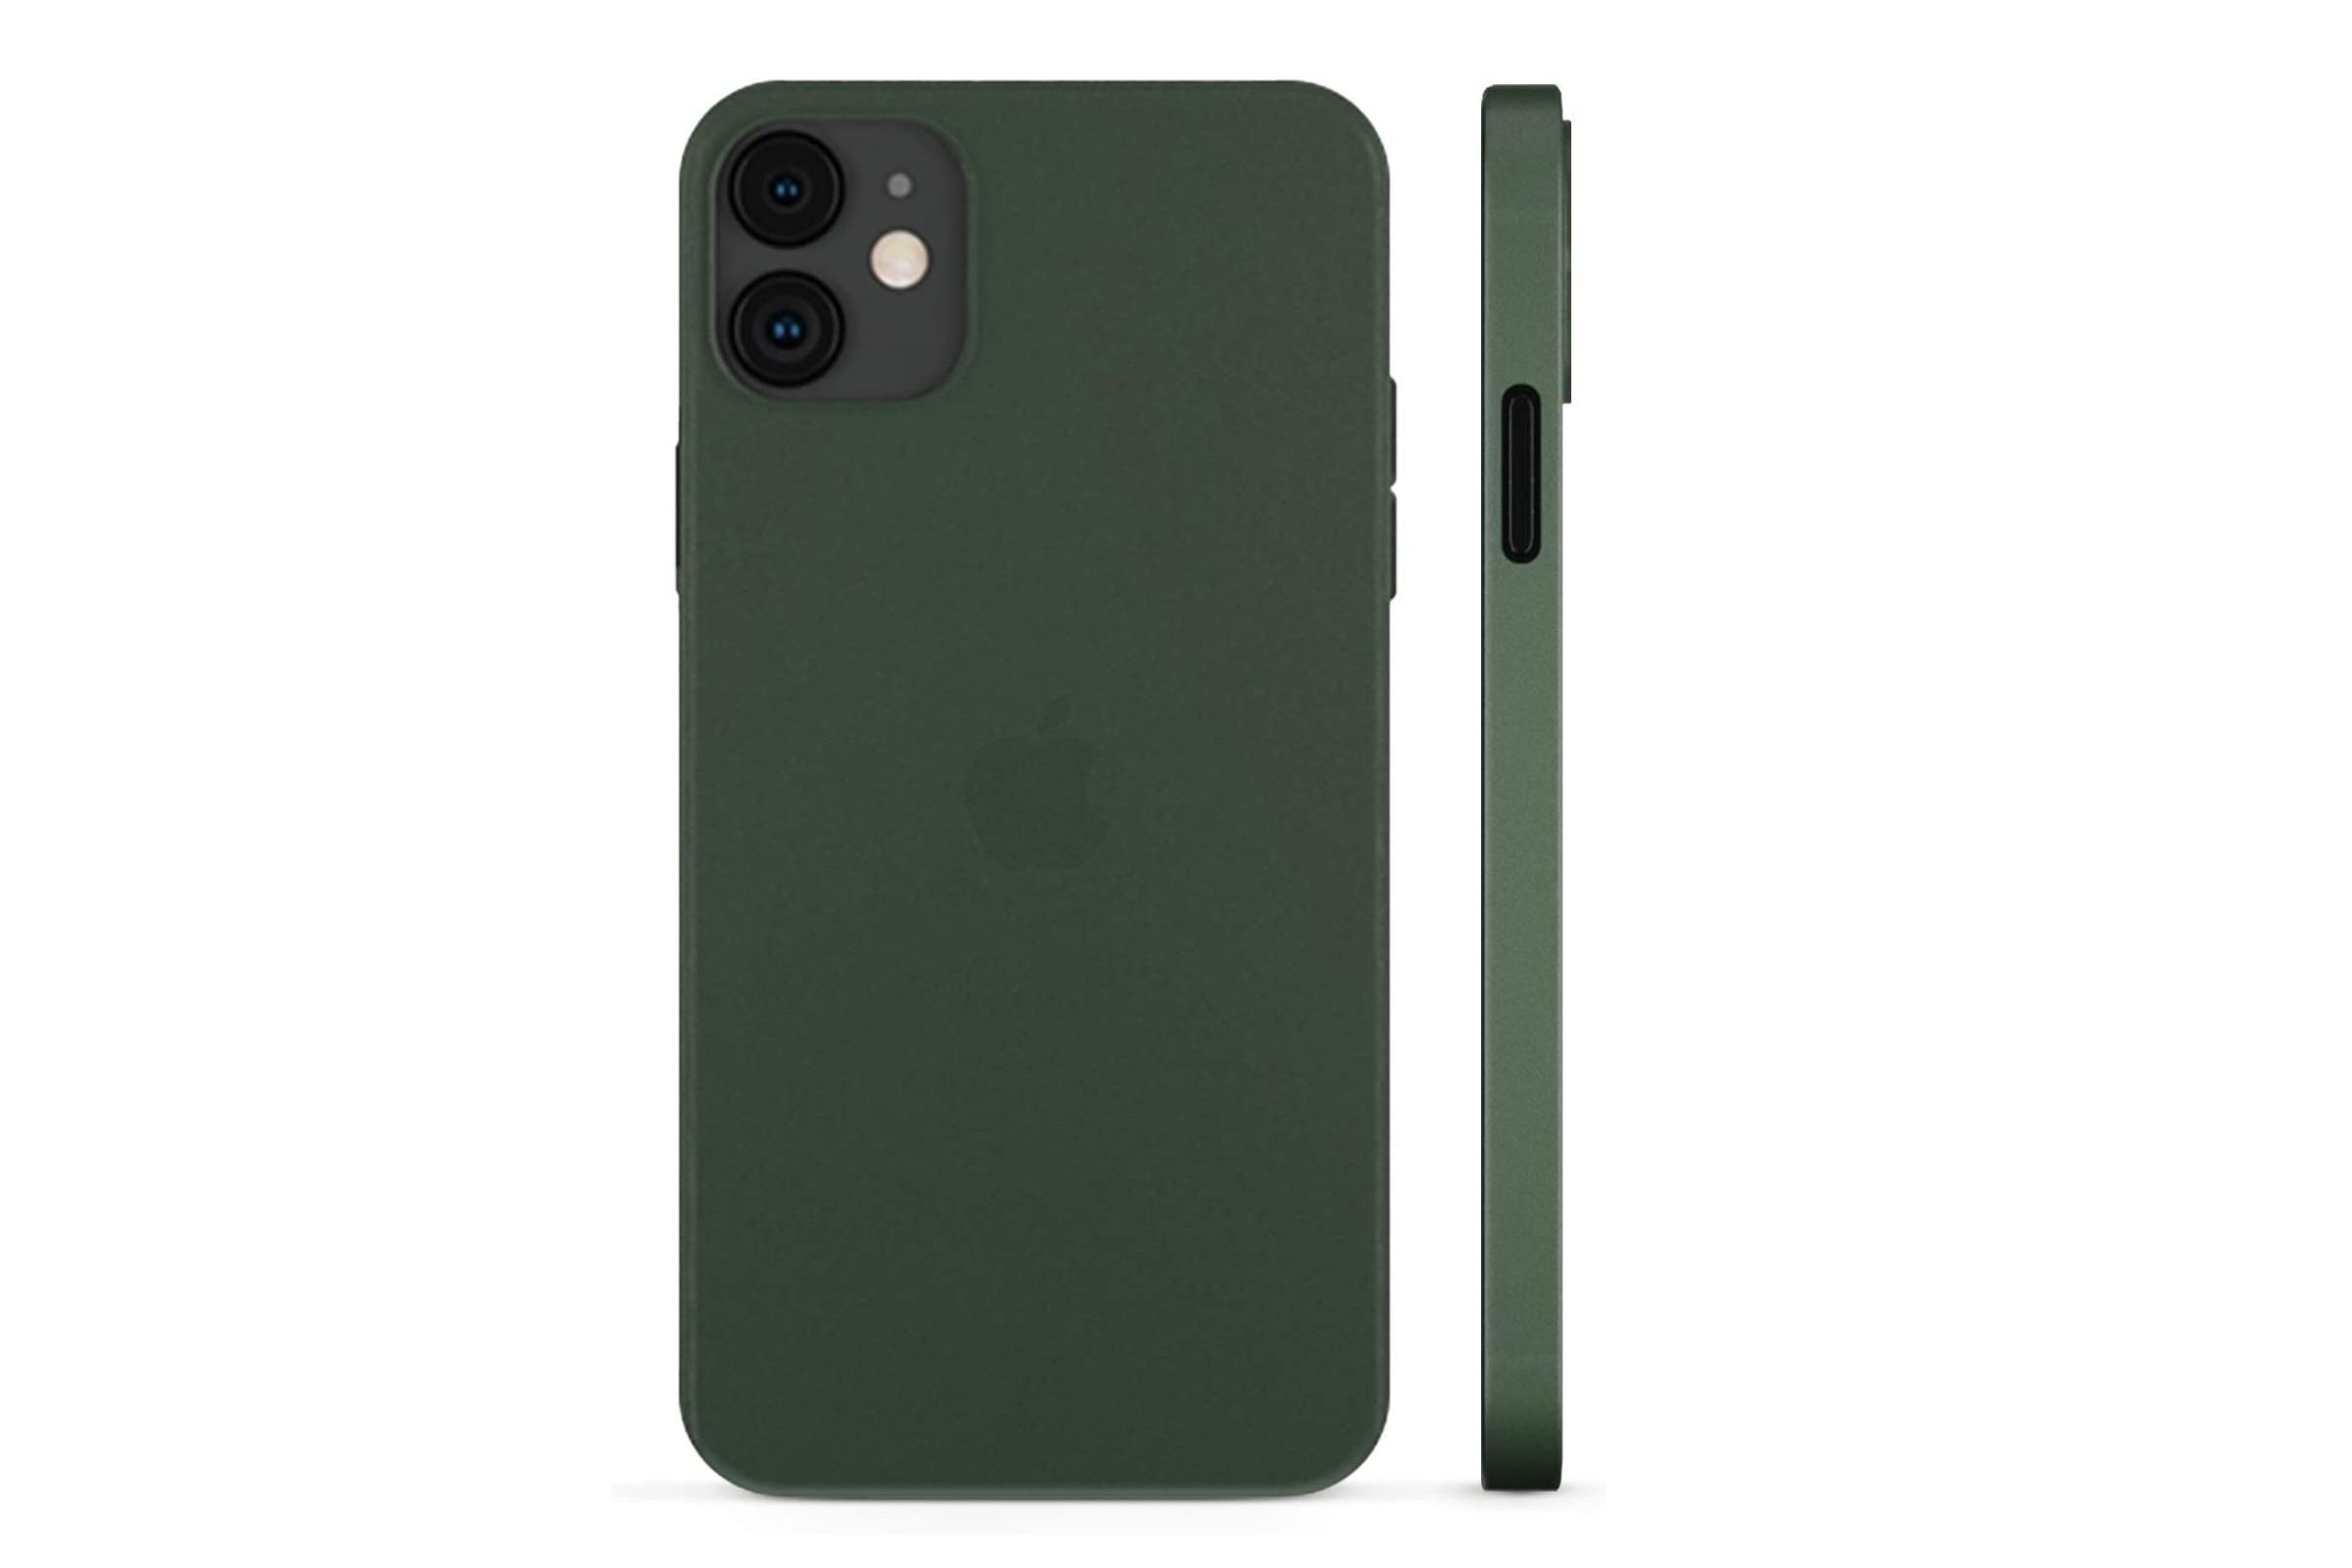 PEEL Ultra Thin iPhone 12 Mini Case - The best iPhone 12 mini cases you can get - updated July 2022